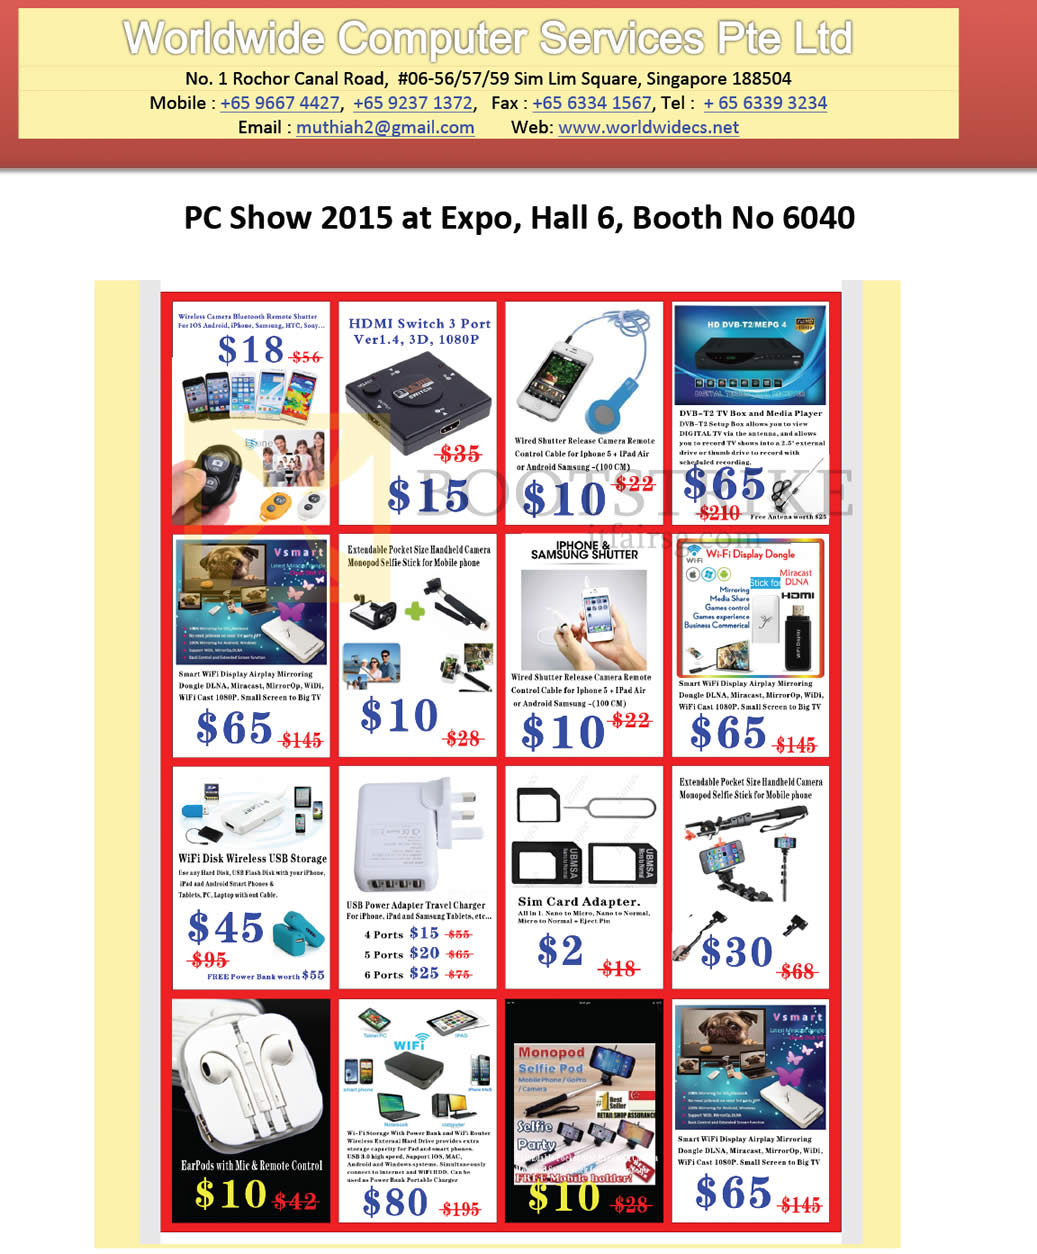 PC SHOW 2015 price list image brochure of Worldwide Computer Services Accessories, Sim Card Adapter, Power Adapter Travel Charger, Wireless USB Storage, Handheld Camera, Wi-fi Display Dongle